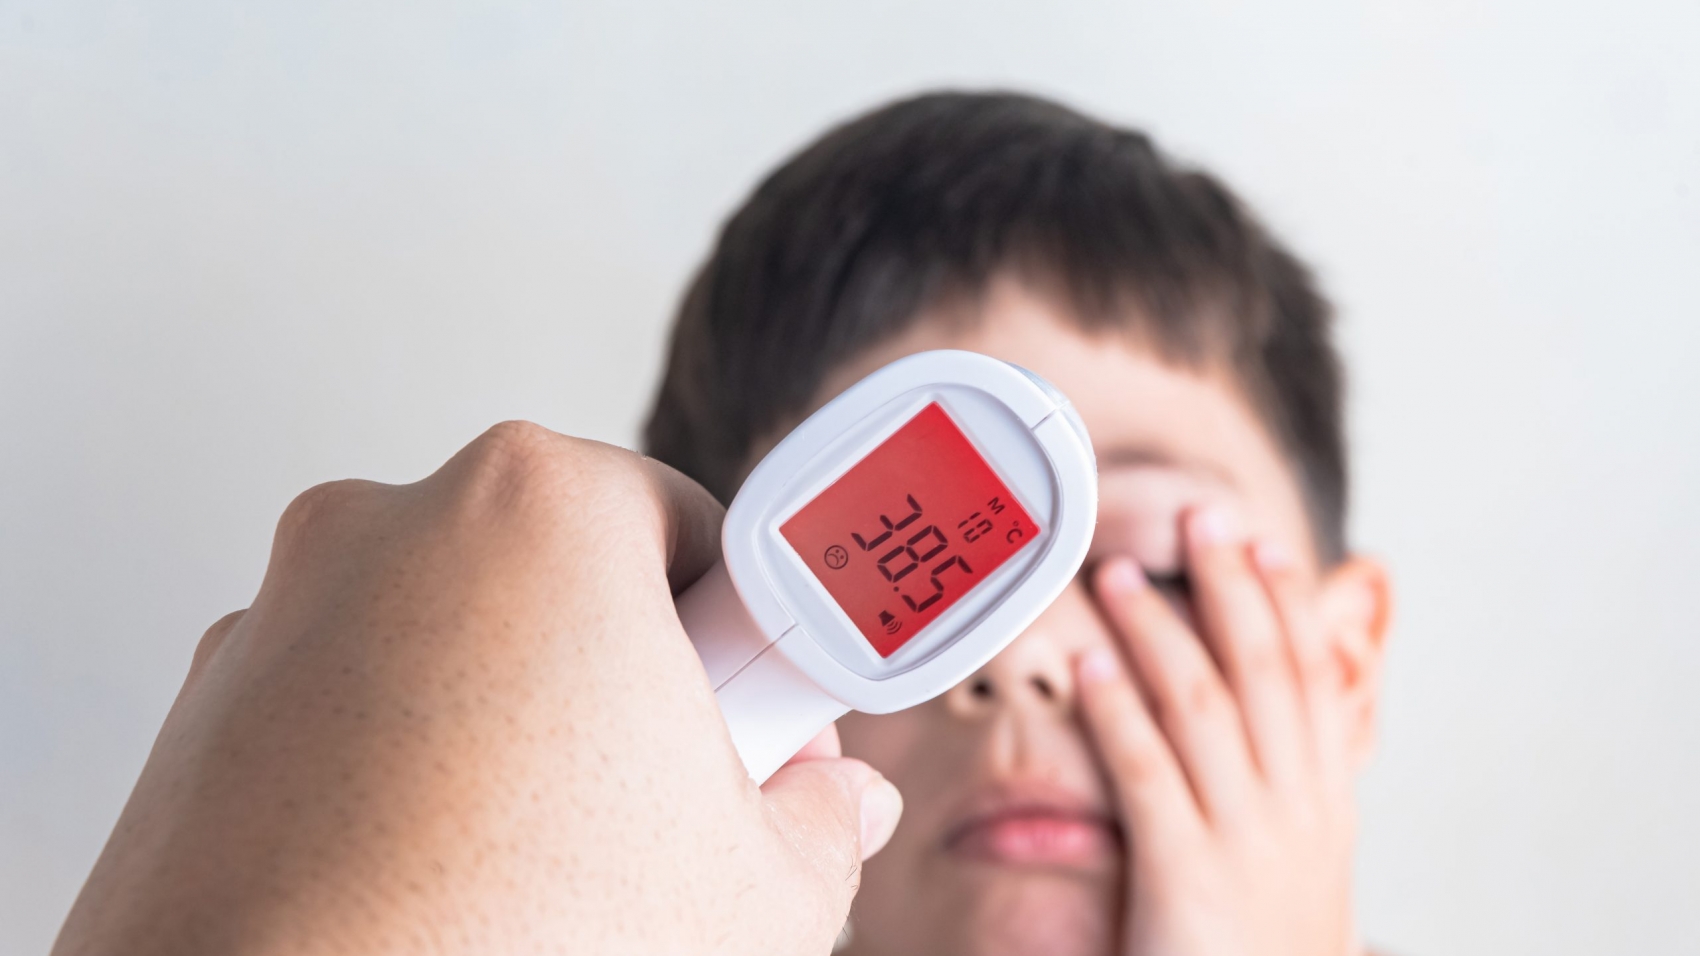 Measuring the fever of a cute boy